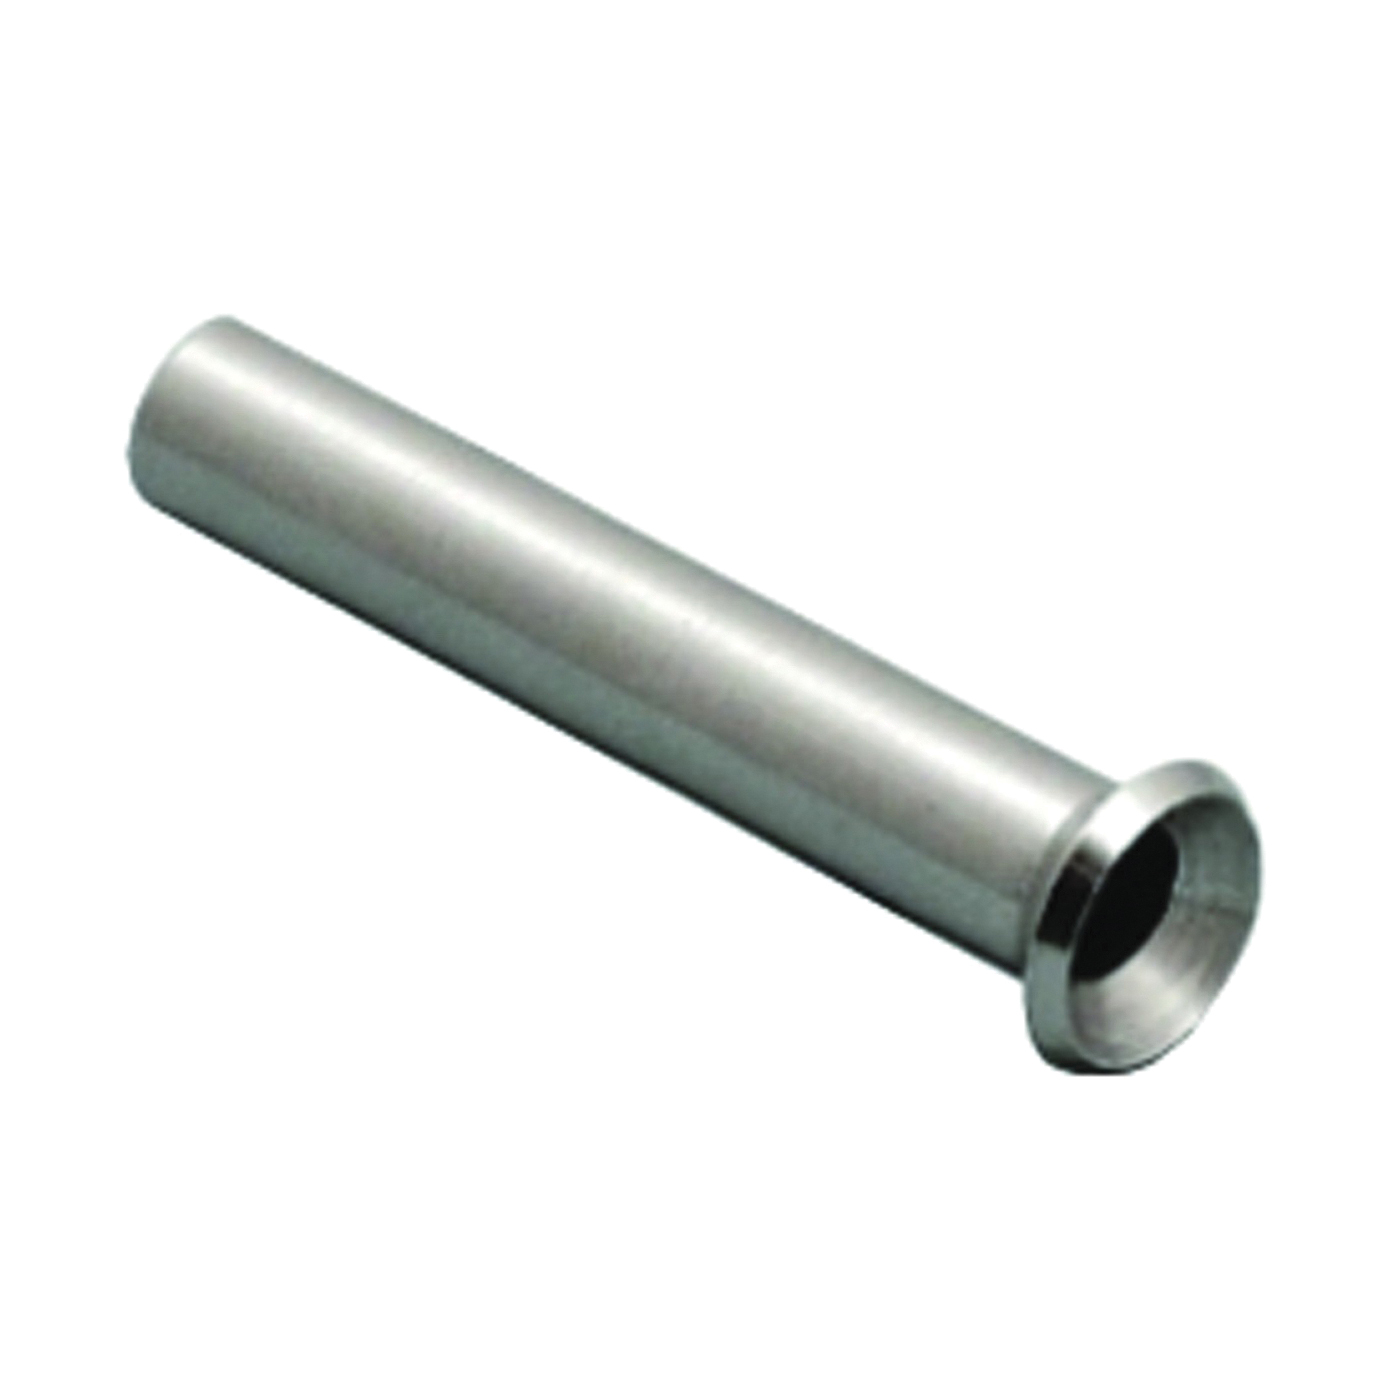 RT PS-10 Post Sleeve Rail, Stainless Steel, For: Mid-Posts Where Cable Passes Through to Prevent Chaffing